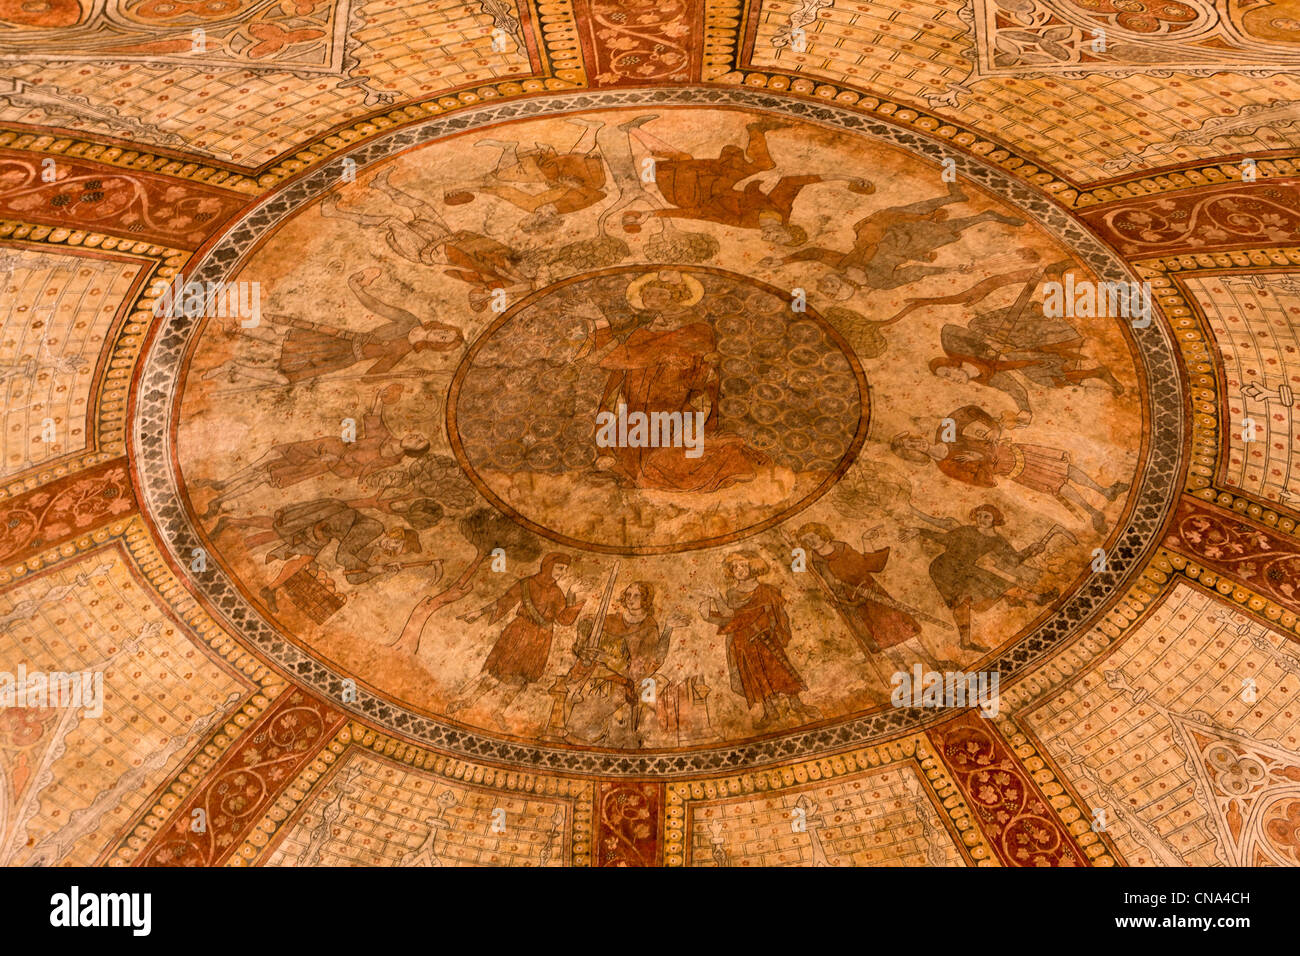 France, Lot, Cahors, Saint Etienne Cathedral, Dome Pendant on details of frescoes Stock Photo